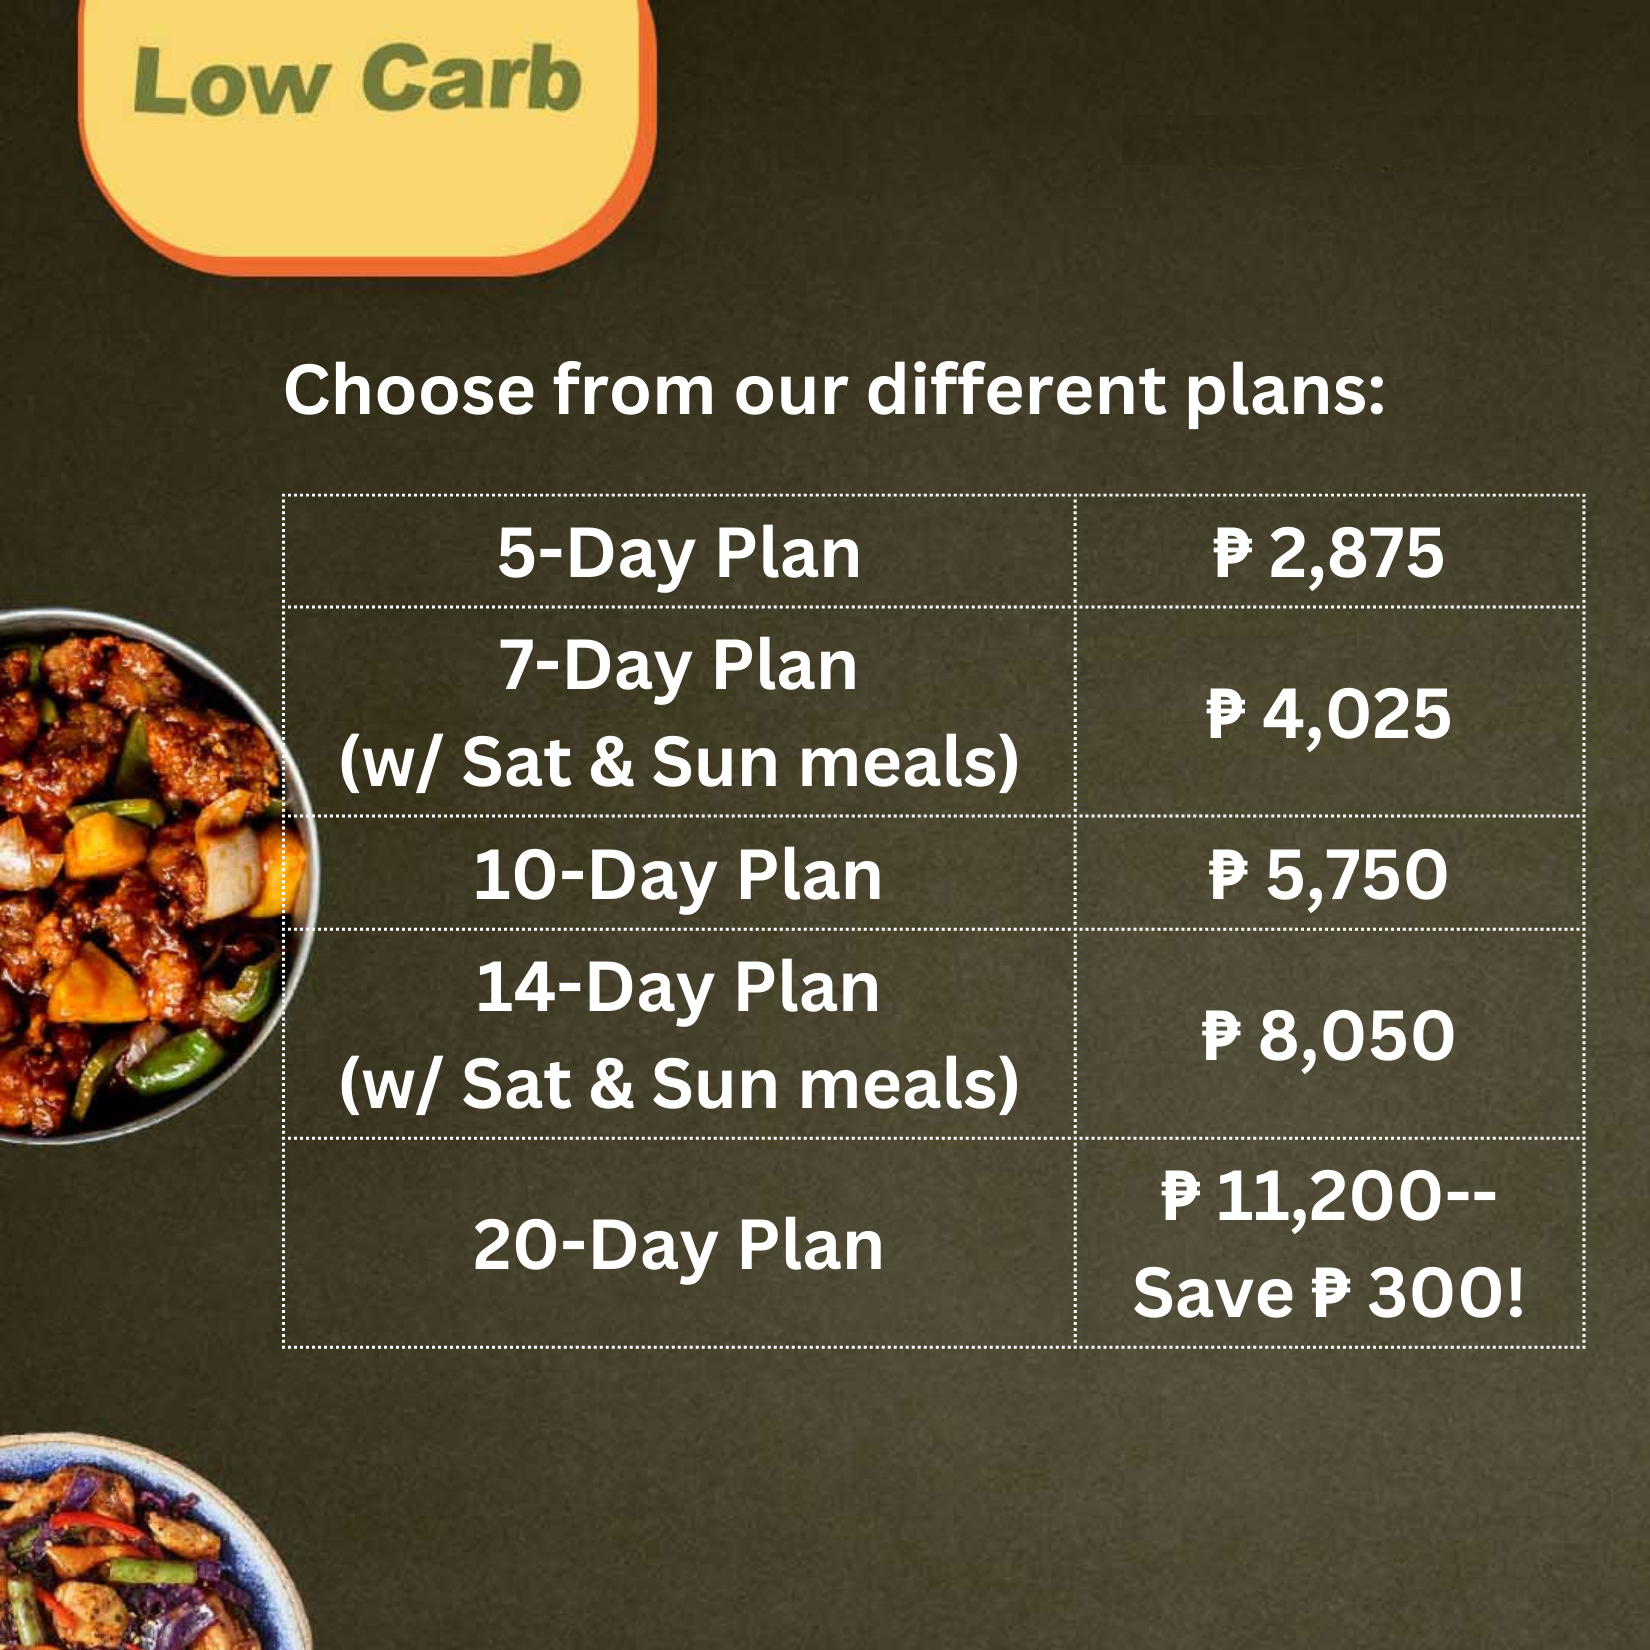 keto food delivery | keto diet manila | low carb delivery | keto diet | keto diet manila | ketos of manila | keto diet philippines | 21 day keto challenge